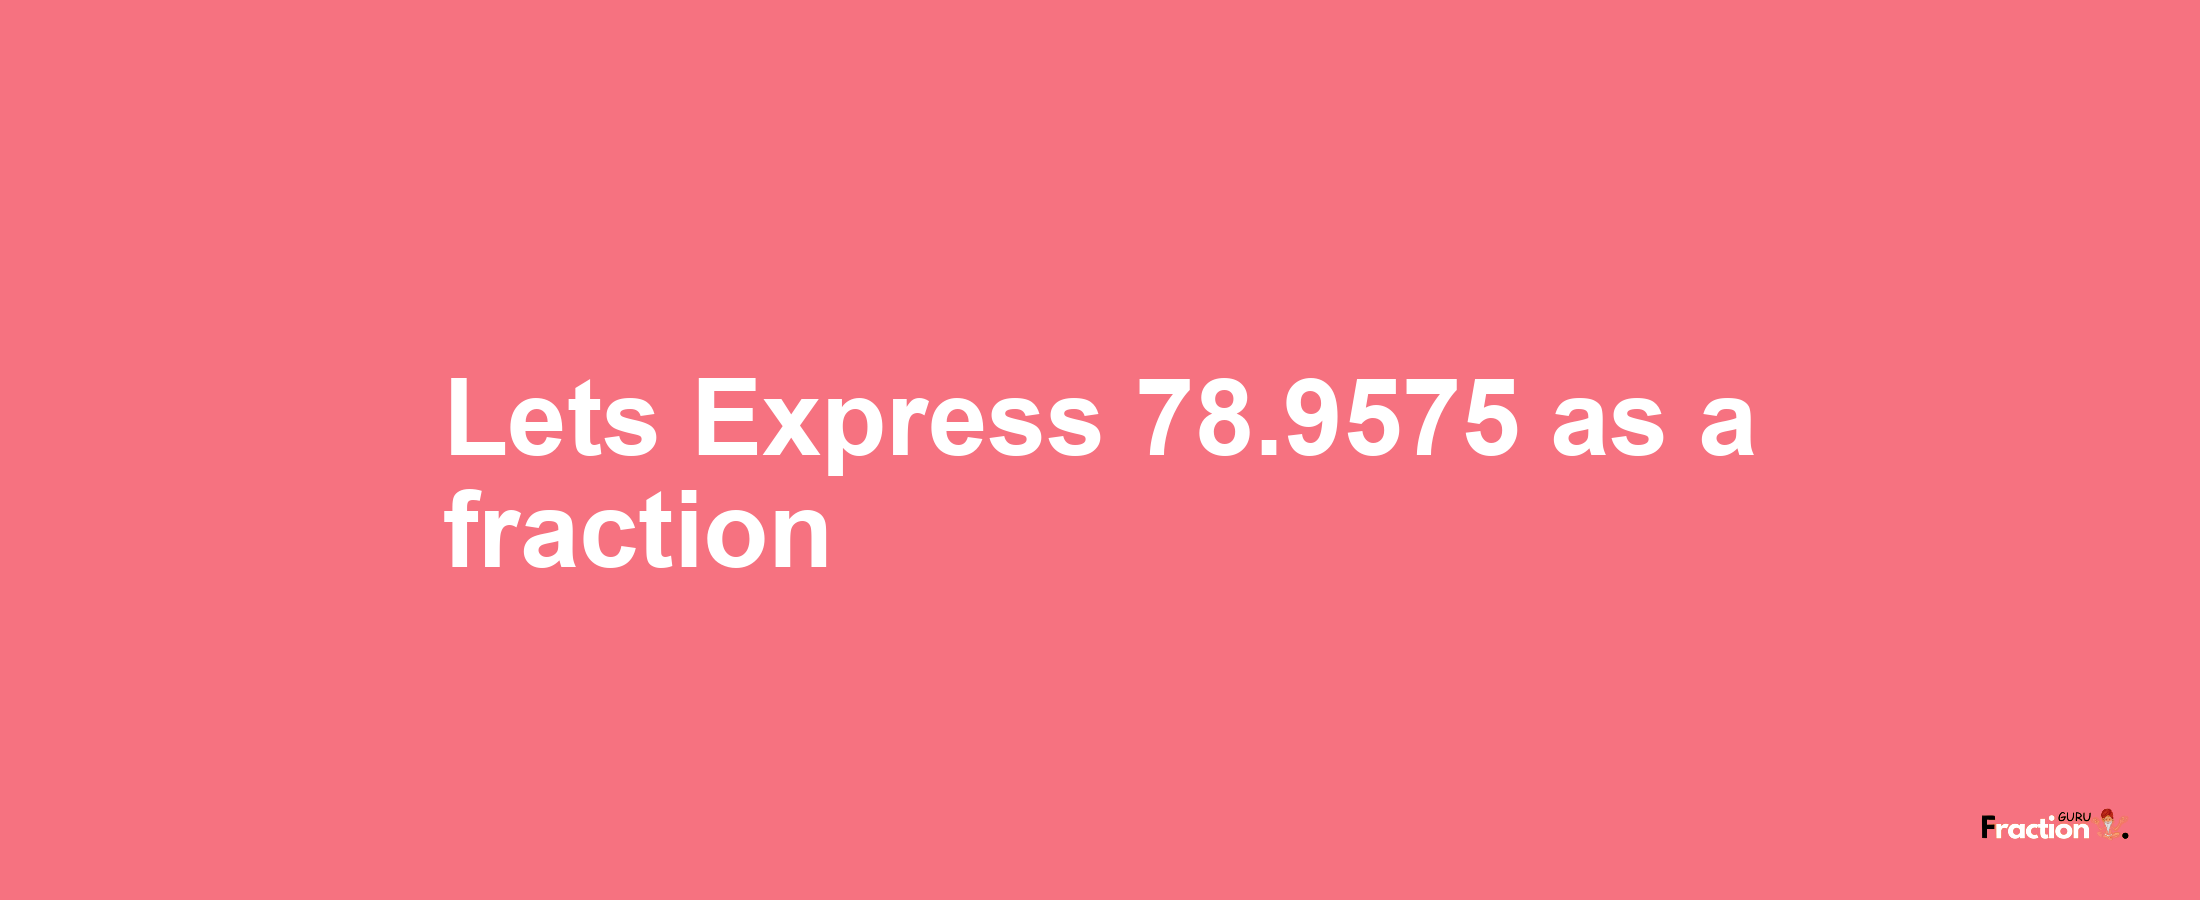 Lets Express 78.9575 as afraction